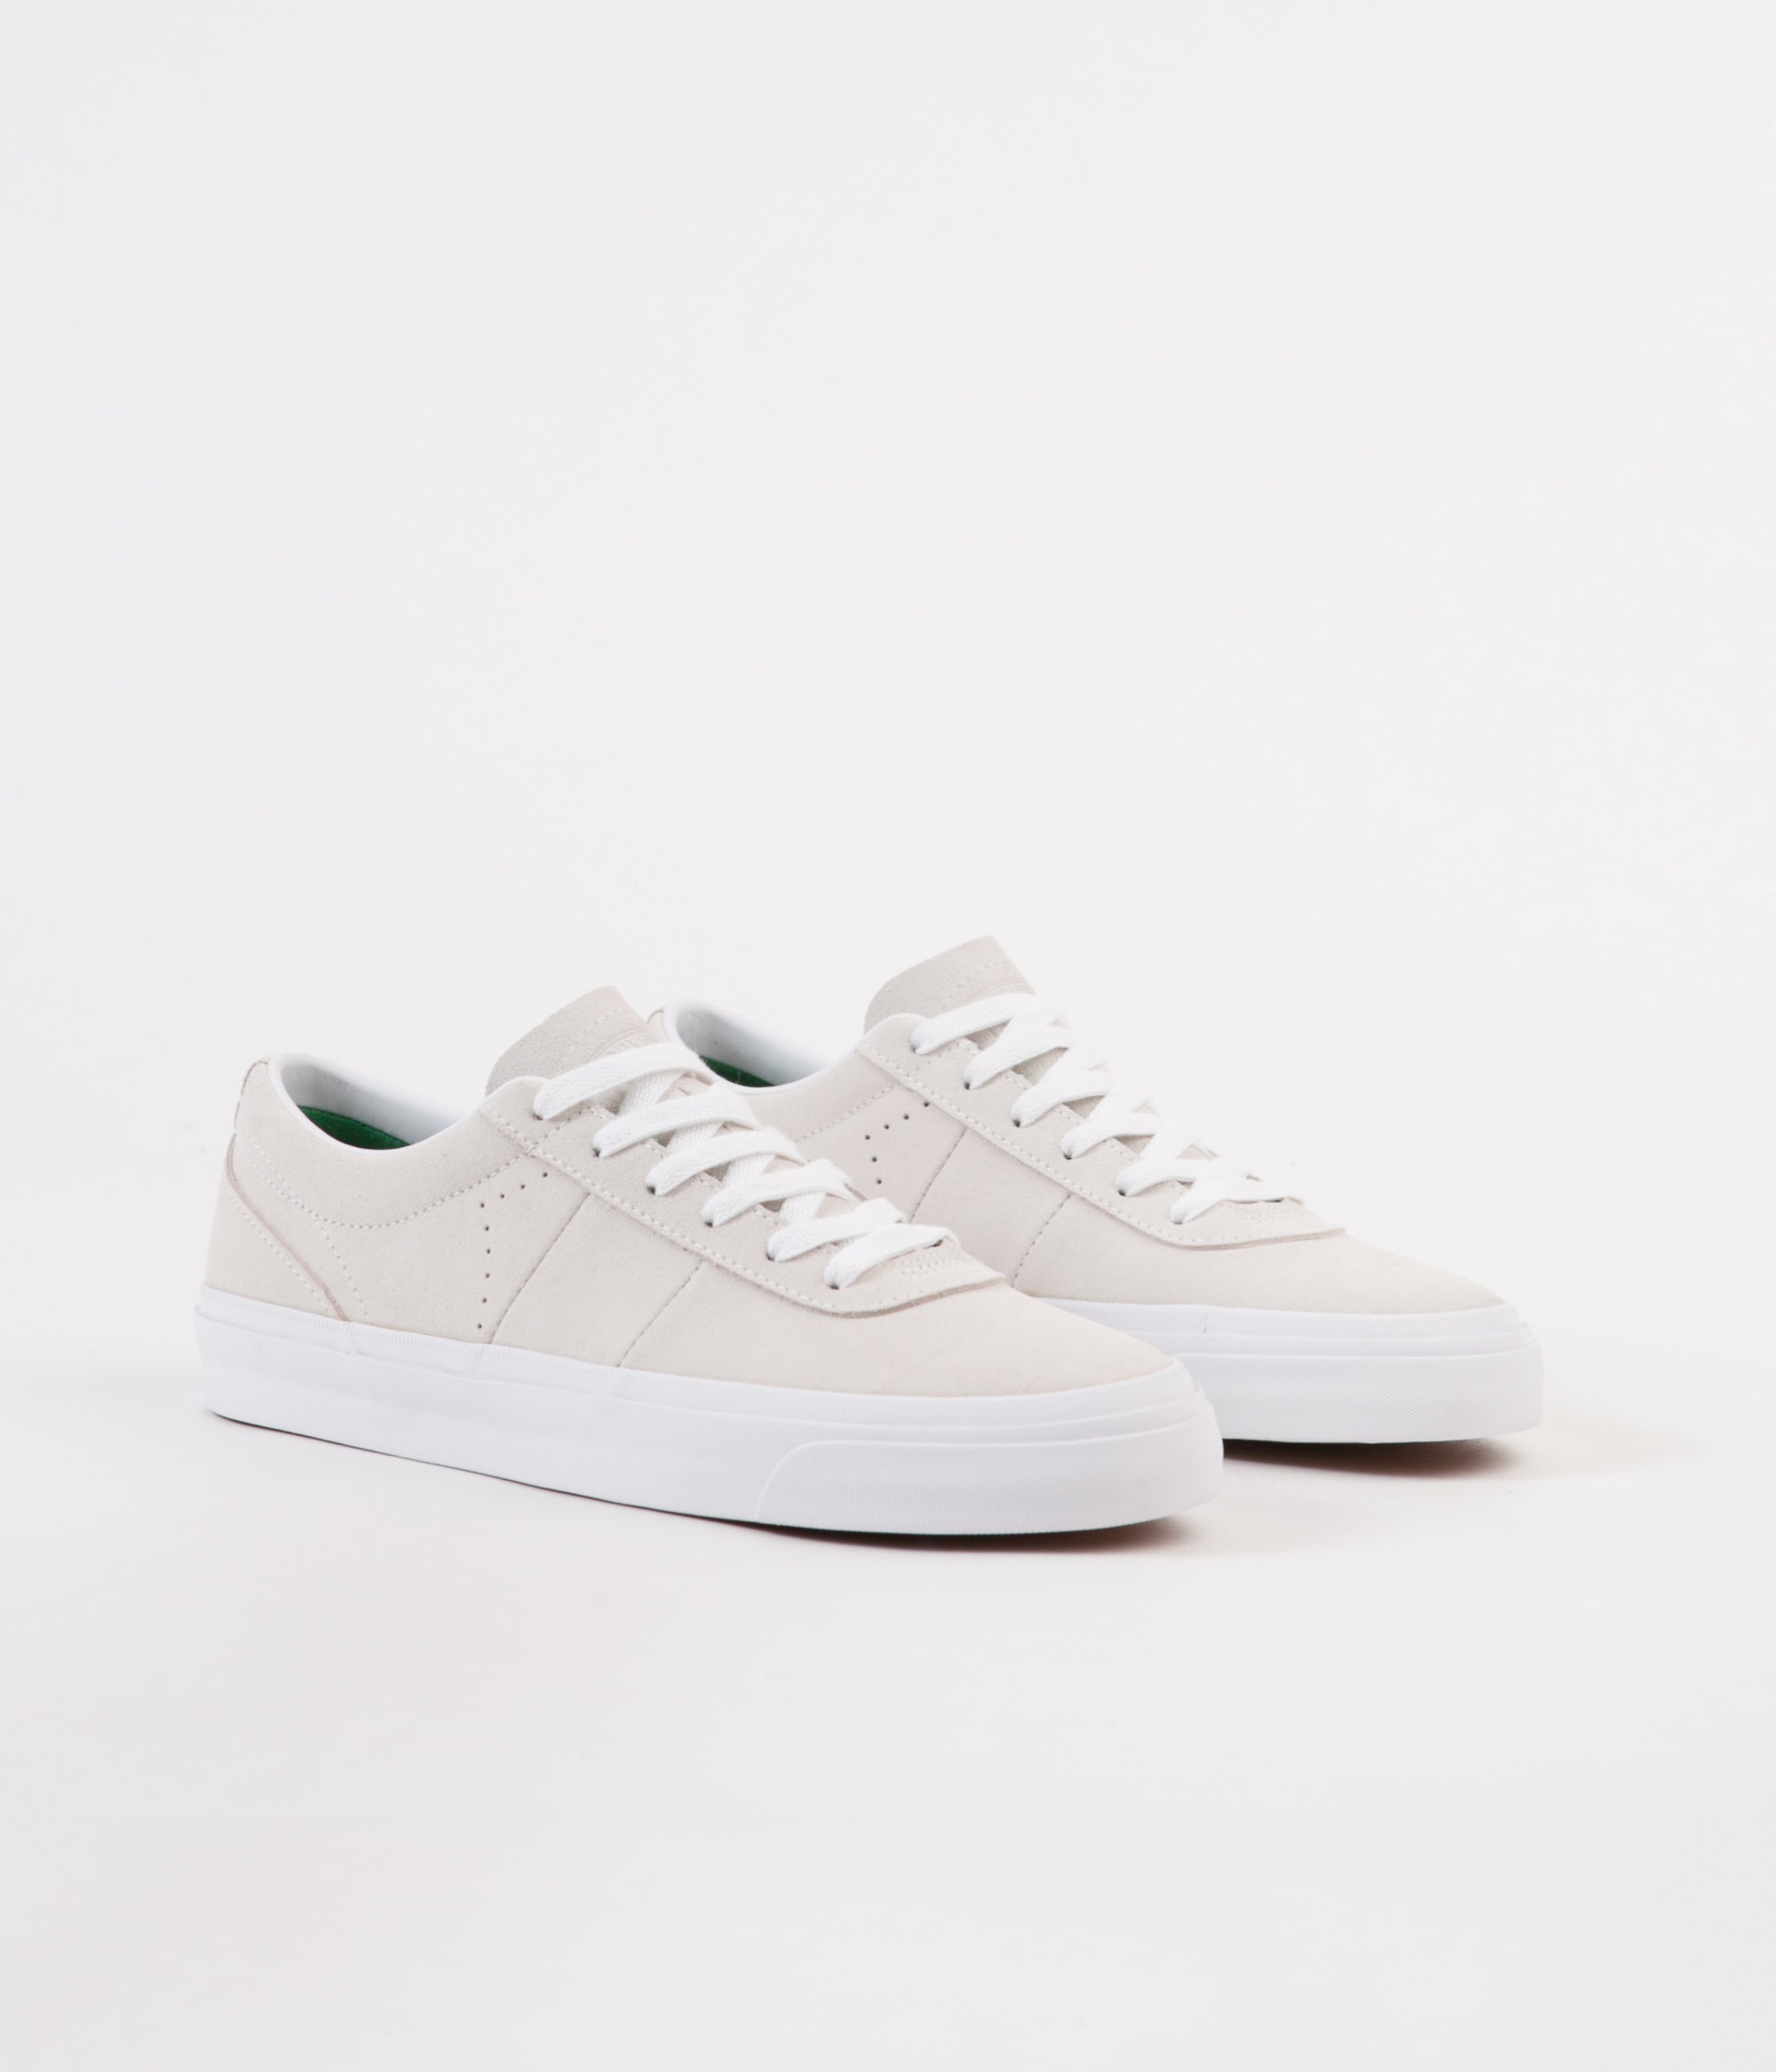 Converse One Star CC Pro Ox Shoes 